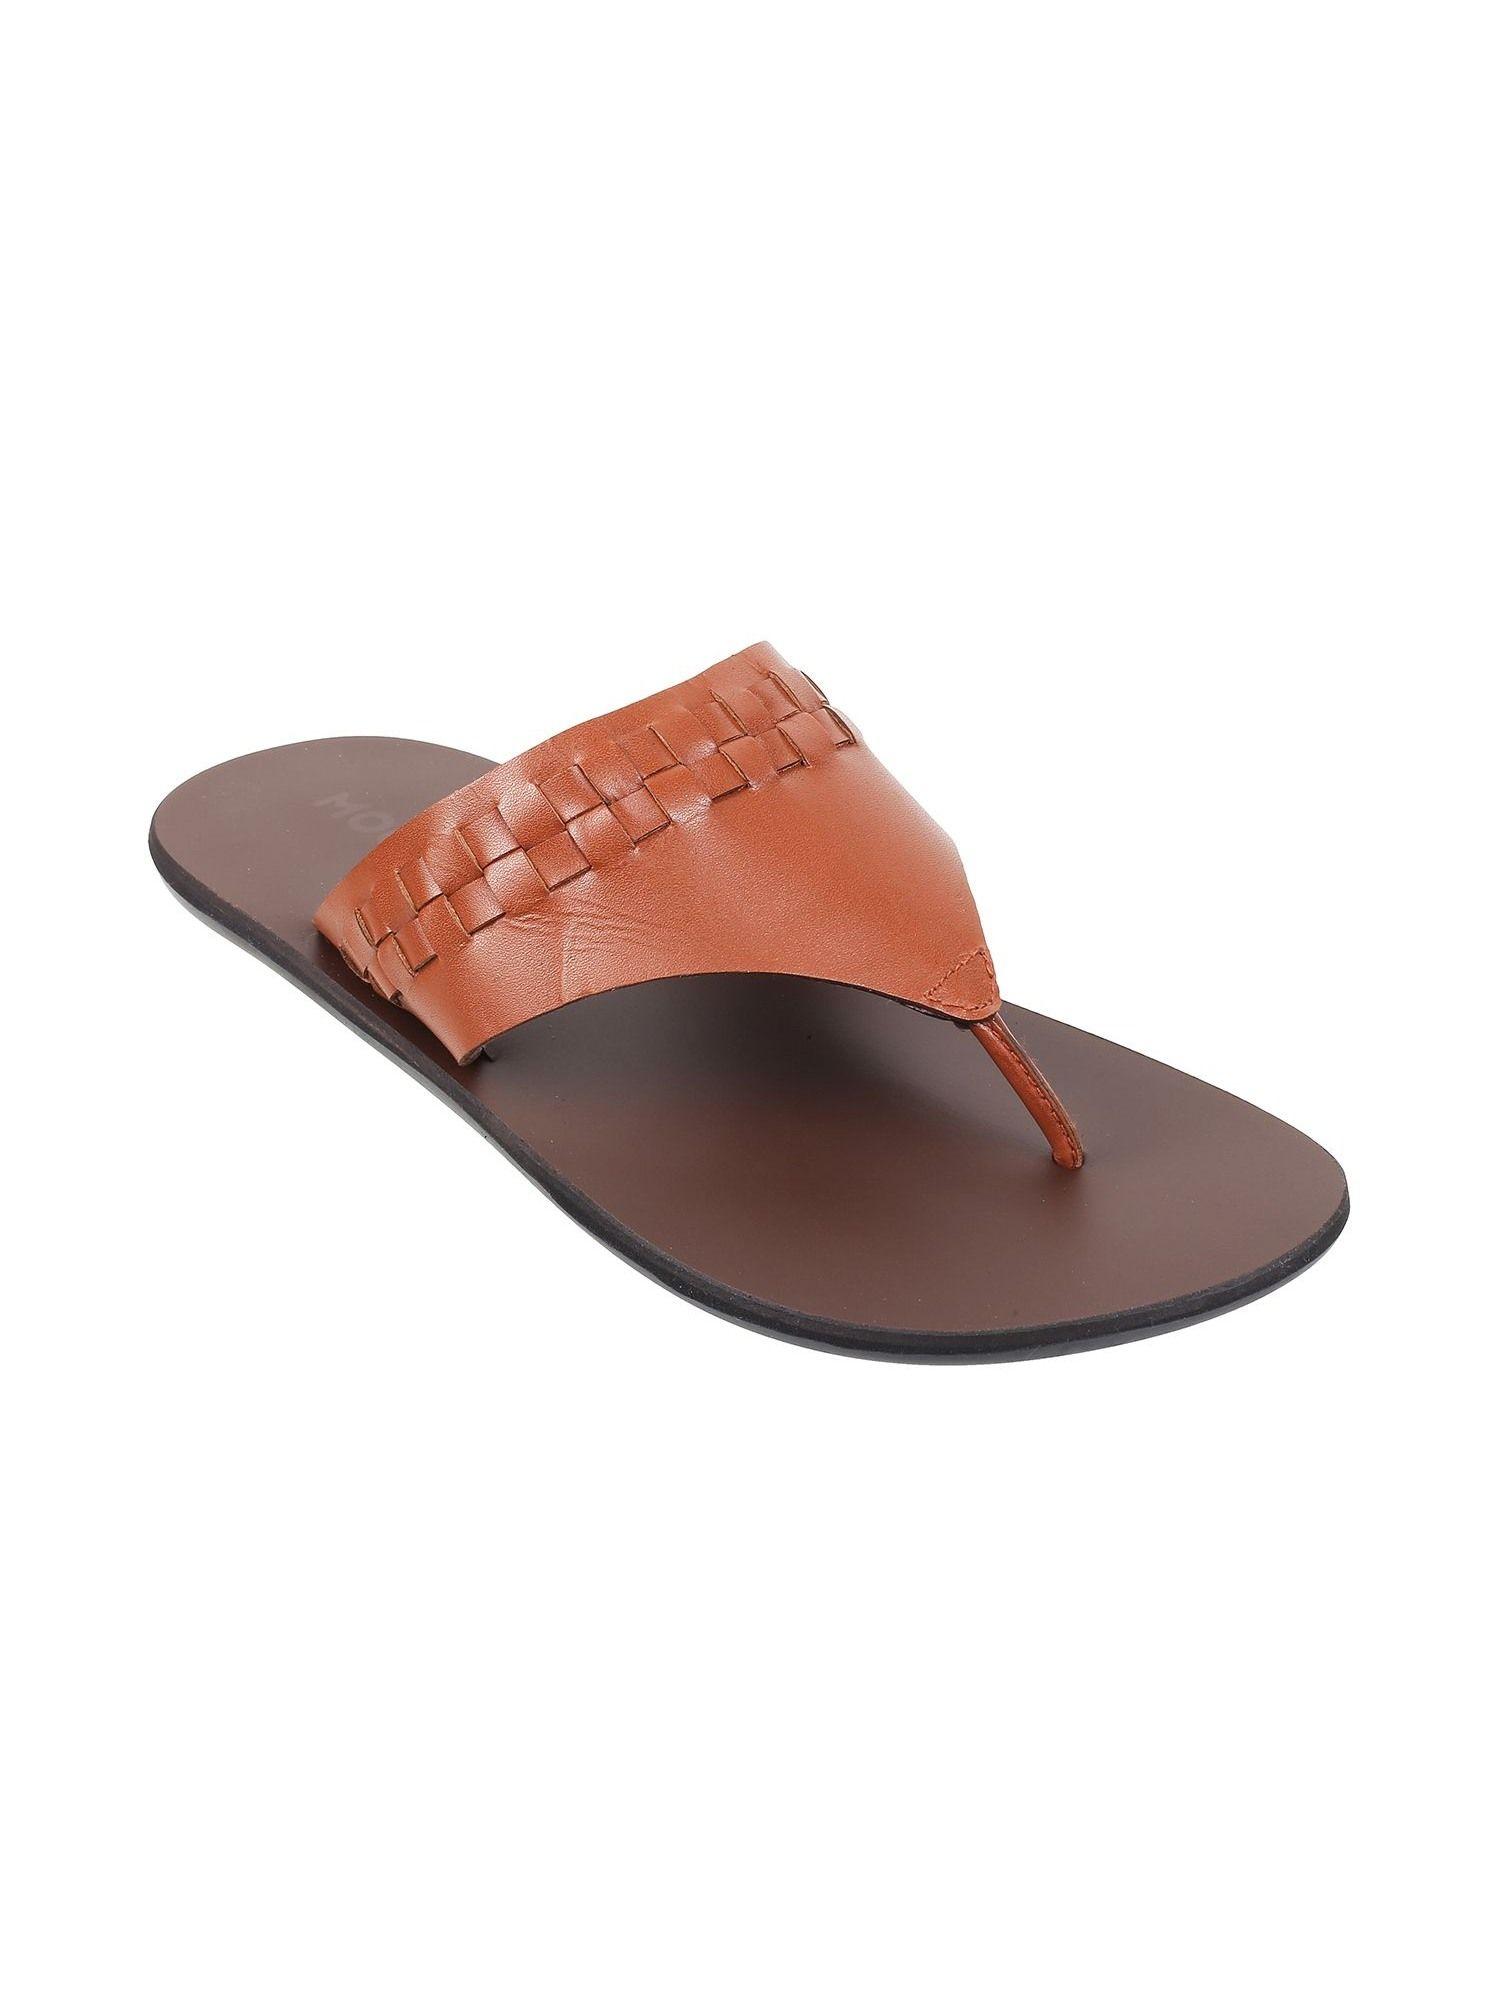 men leather tan slippers